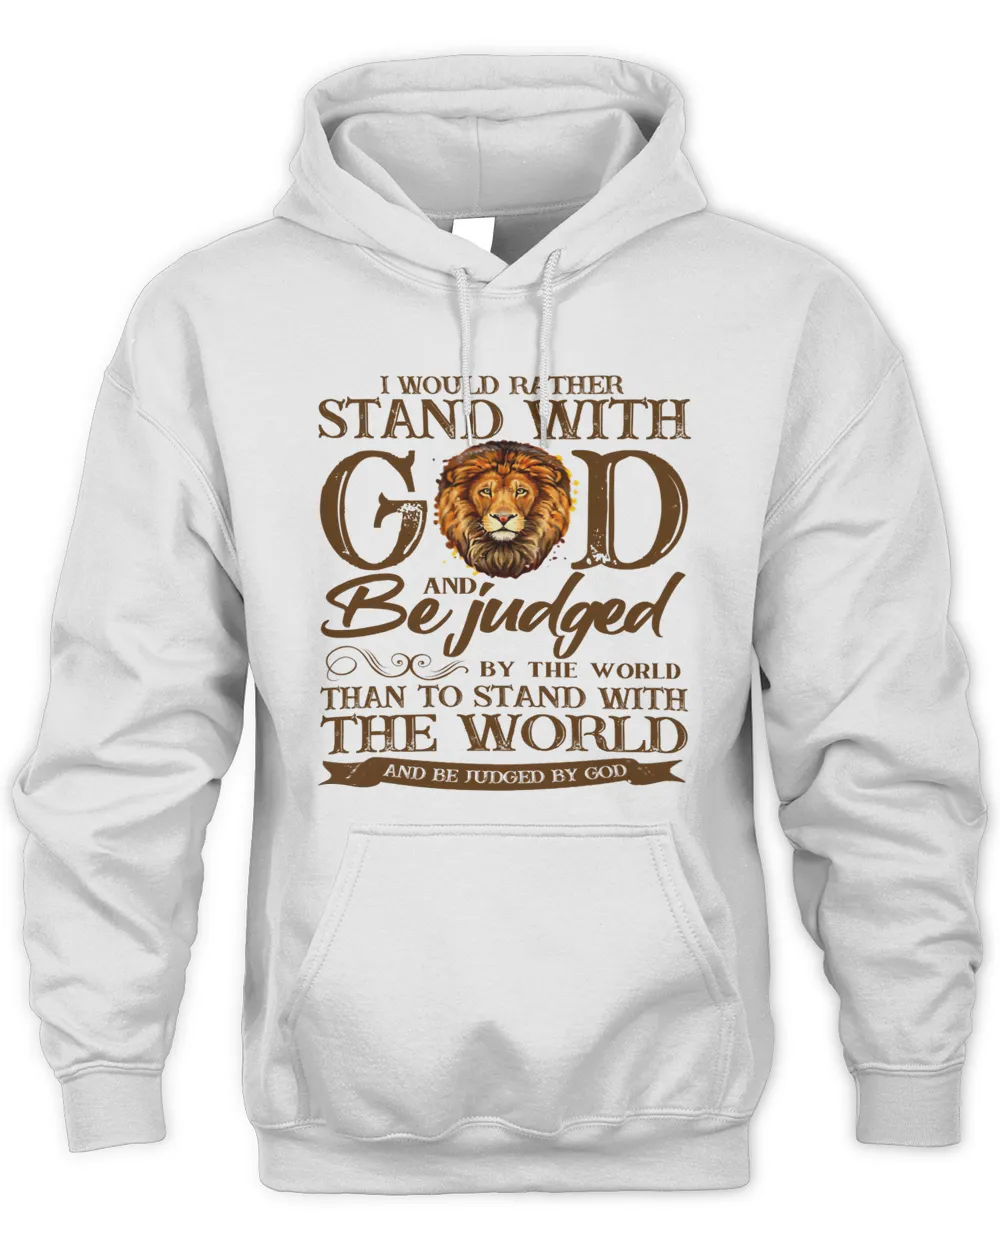 I Would Rather Stand With God And Be Judged By The World Than To Stand With The World And Be Judged By God